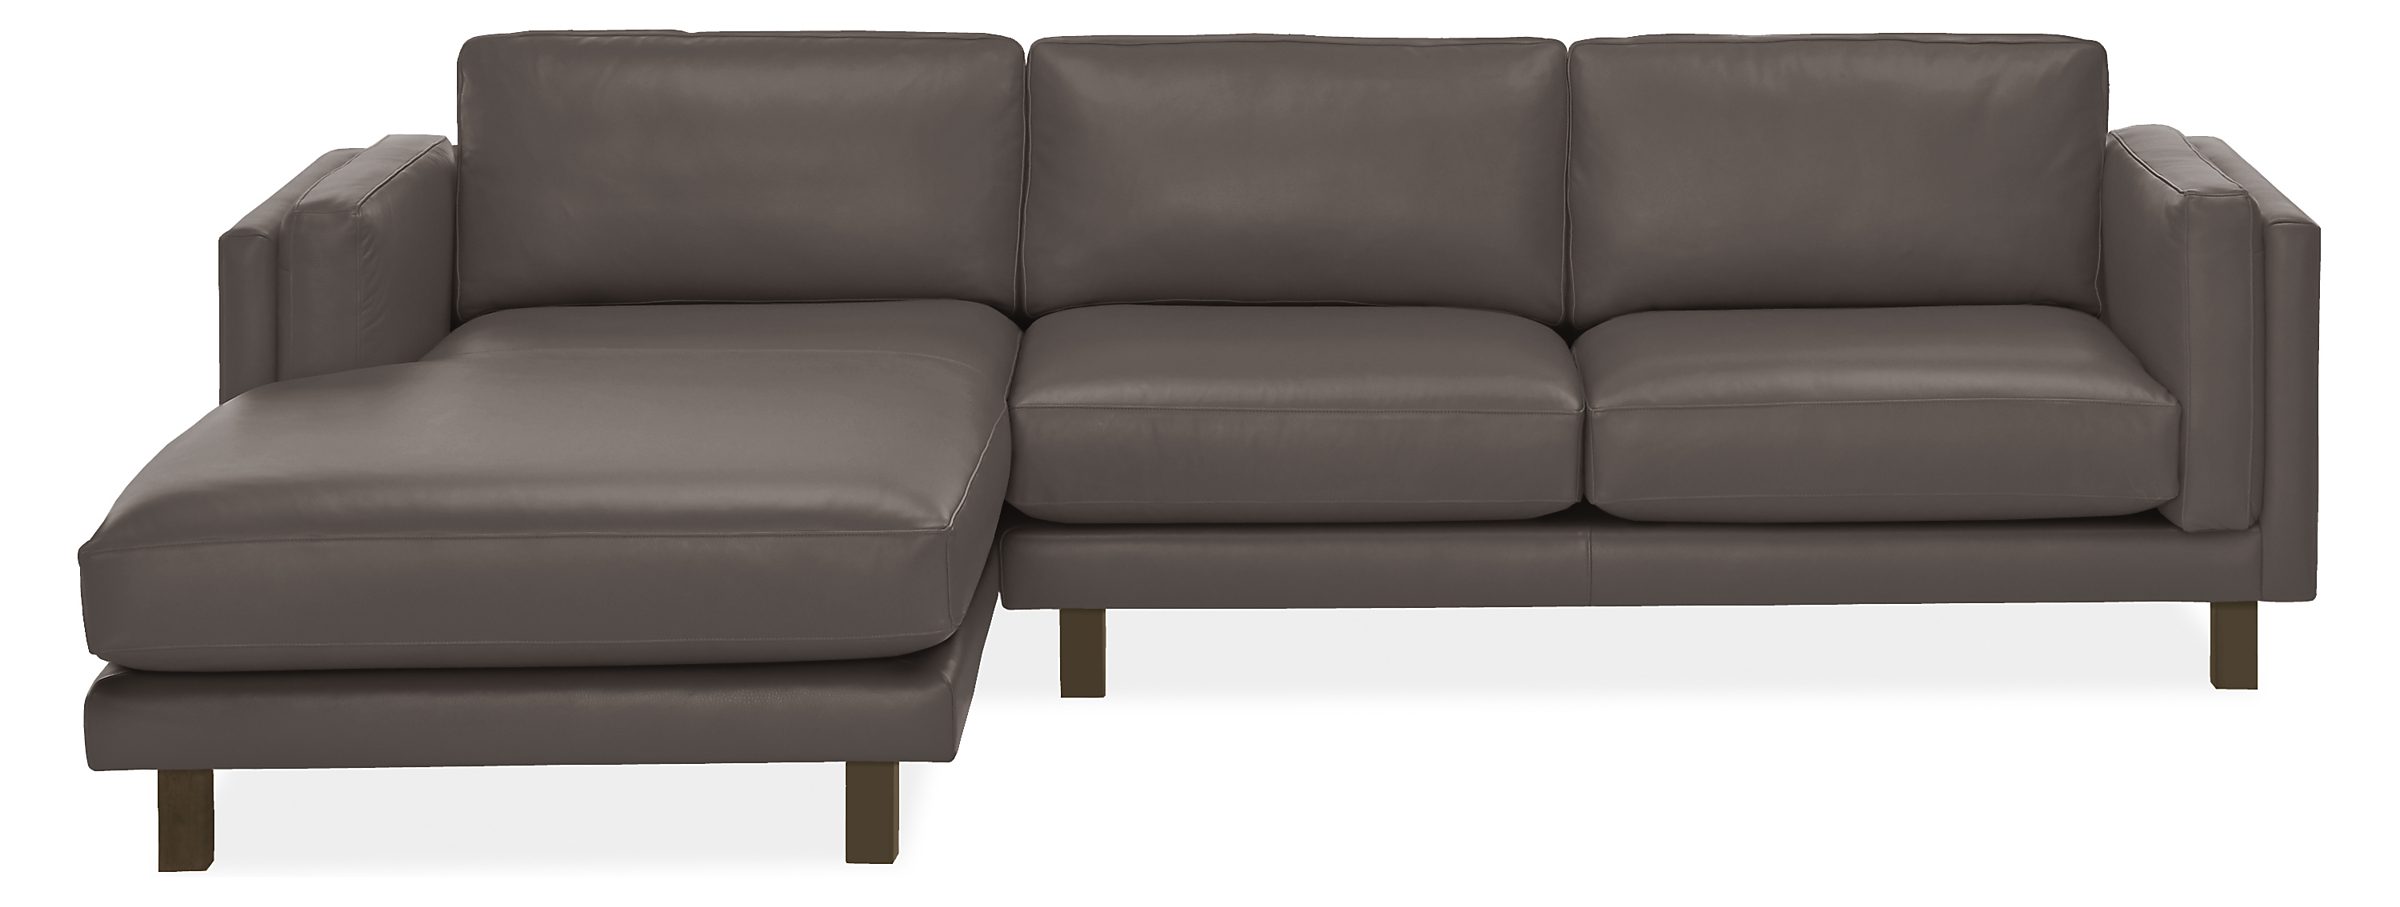 Cade Leather Sofas with Chaise